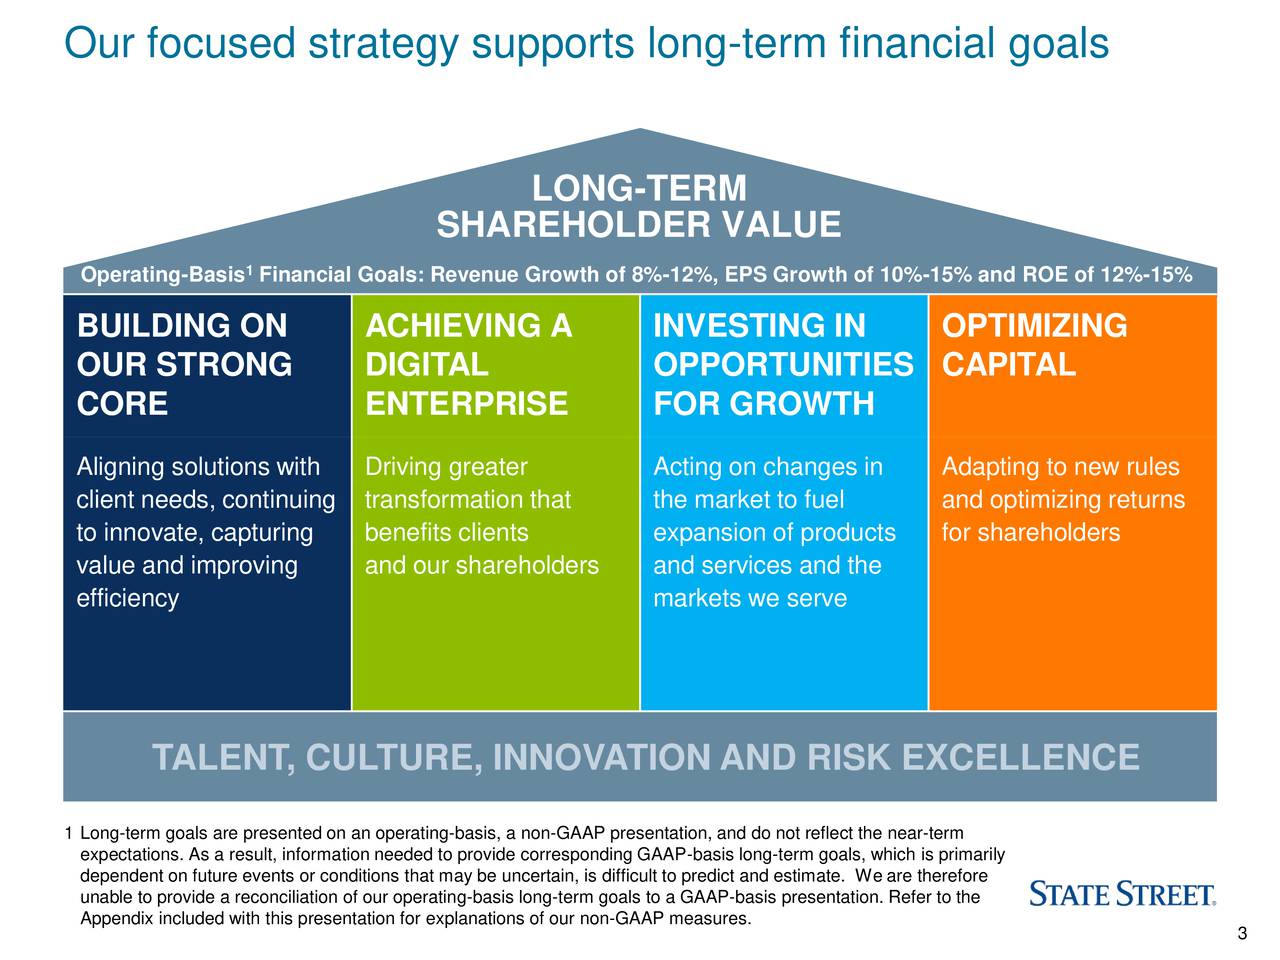 LONG-TERM SHAREHOLDER VALUE 1 Operating-Basis Financial Goals: Revenue Growth of 8%-12%, EPS Growth of 10%-15% and ROE of 12%-15% BUILDING ON ACHIEVING A INVESTING IN OPTIMIZING OUR STRONG DIGITAL OPPORTUNITIES CAPITAL CORE ENTERPRISE FOR GROWTH Aligning solutions witDriving greater Acting on changes in Adapting to new rules client needs, continuitransformation that the market to fuel and optimizing returns to innovate, capturingbenefits clients expansion of products for shareholders value and improving and our shareholders and services and the efficiency markets we serve TALENT, CULTURE, INNOVATION AND RISK EXCELLENCE 1 Long-term goals are presented on an operating-basis, a non-GAAP presentation, and do not reflect the near-term expectations. As a result, information needed to provide corresponding GAAP-basis long-term goals, which is primarily dependent on future events or conditions that may be uncertain, is difficult to predict and estimate. We are therefore unable toprovide a reconciliation of our operating-basis long-term goals to a GAAP-basis presentation. Refer to the Appendix included with this presentation for explanations of our non-GAAP measures. 3